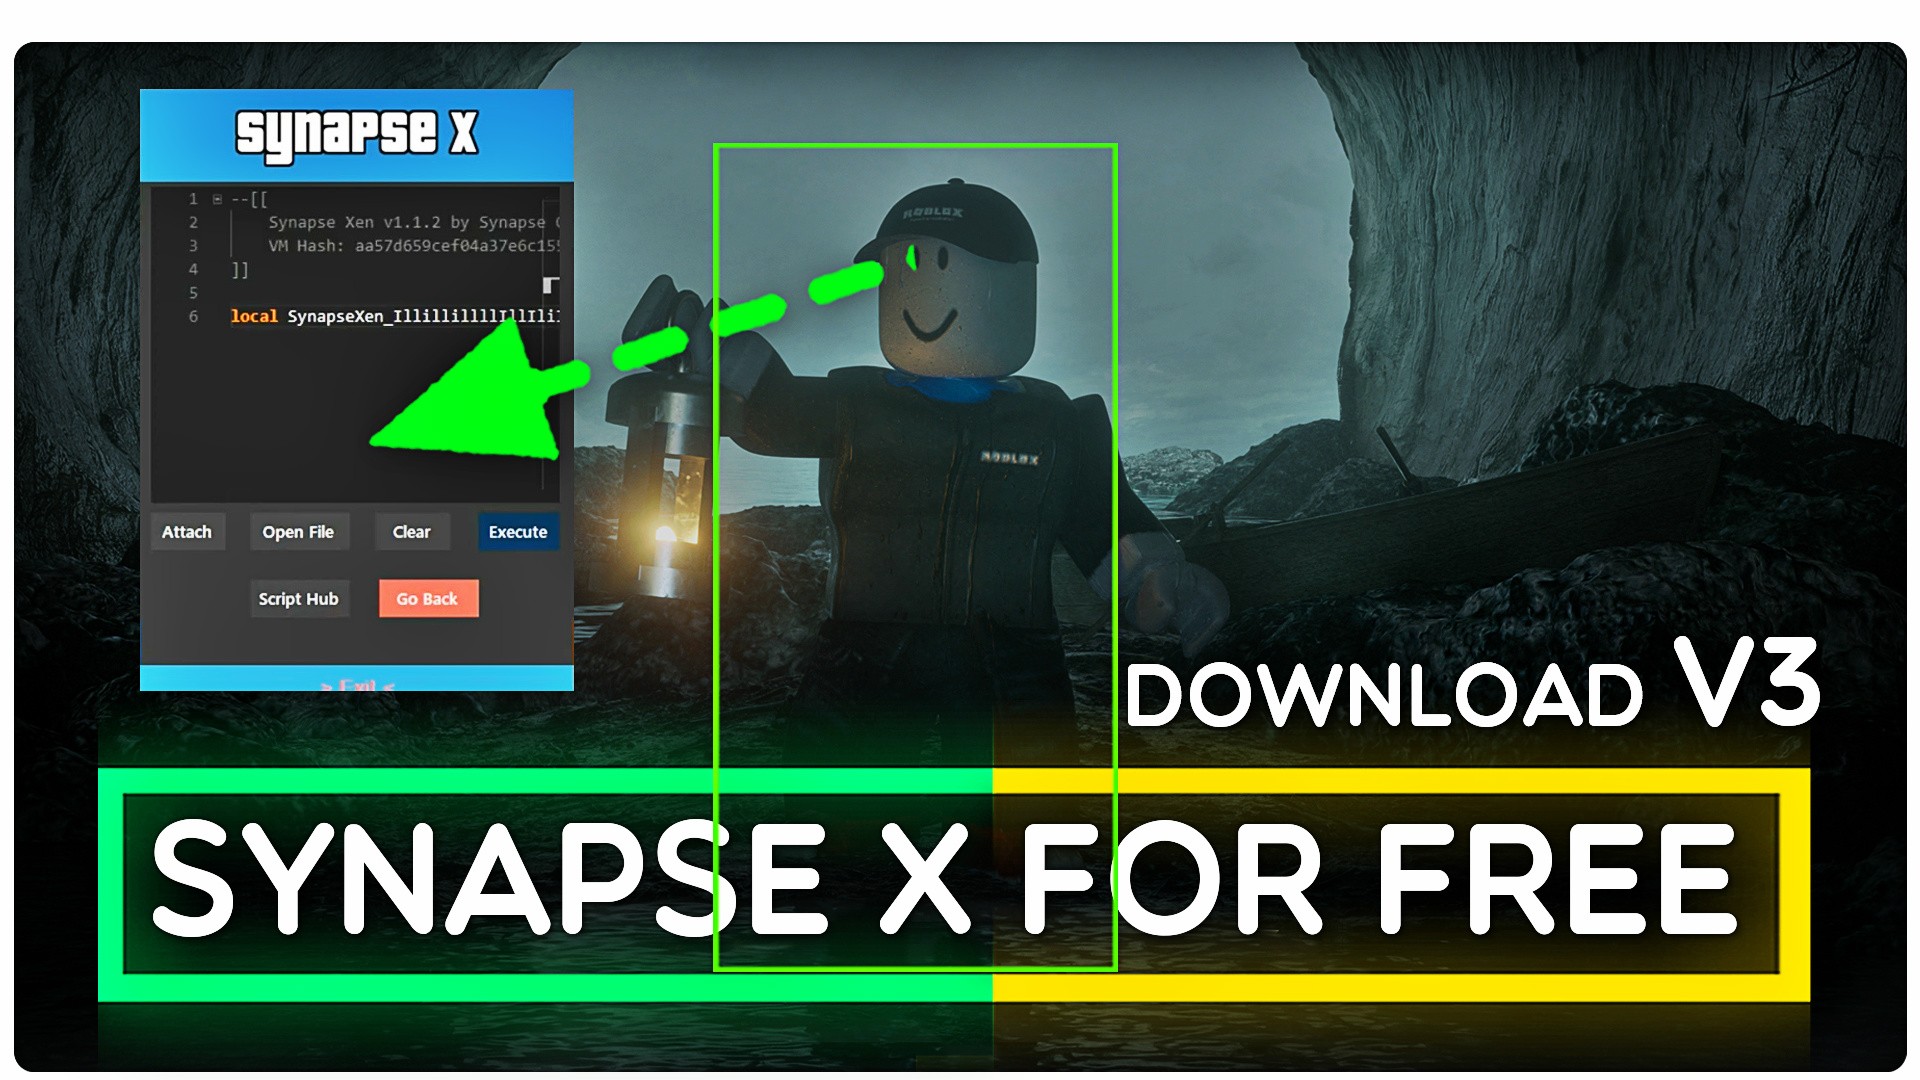 First look at Synapse X V3 : r/robloxhackers